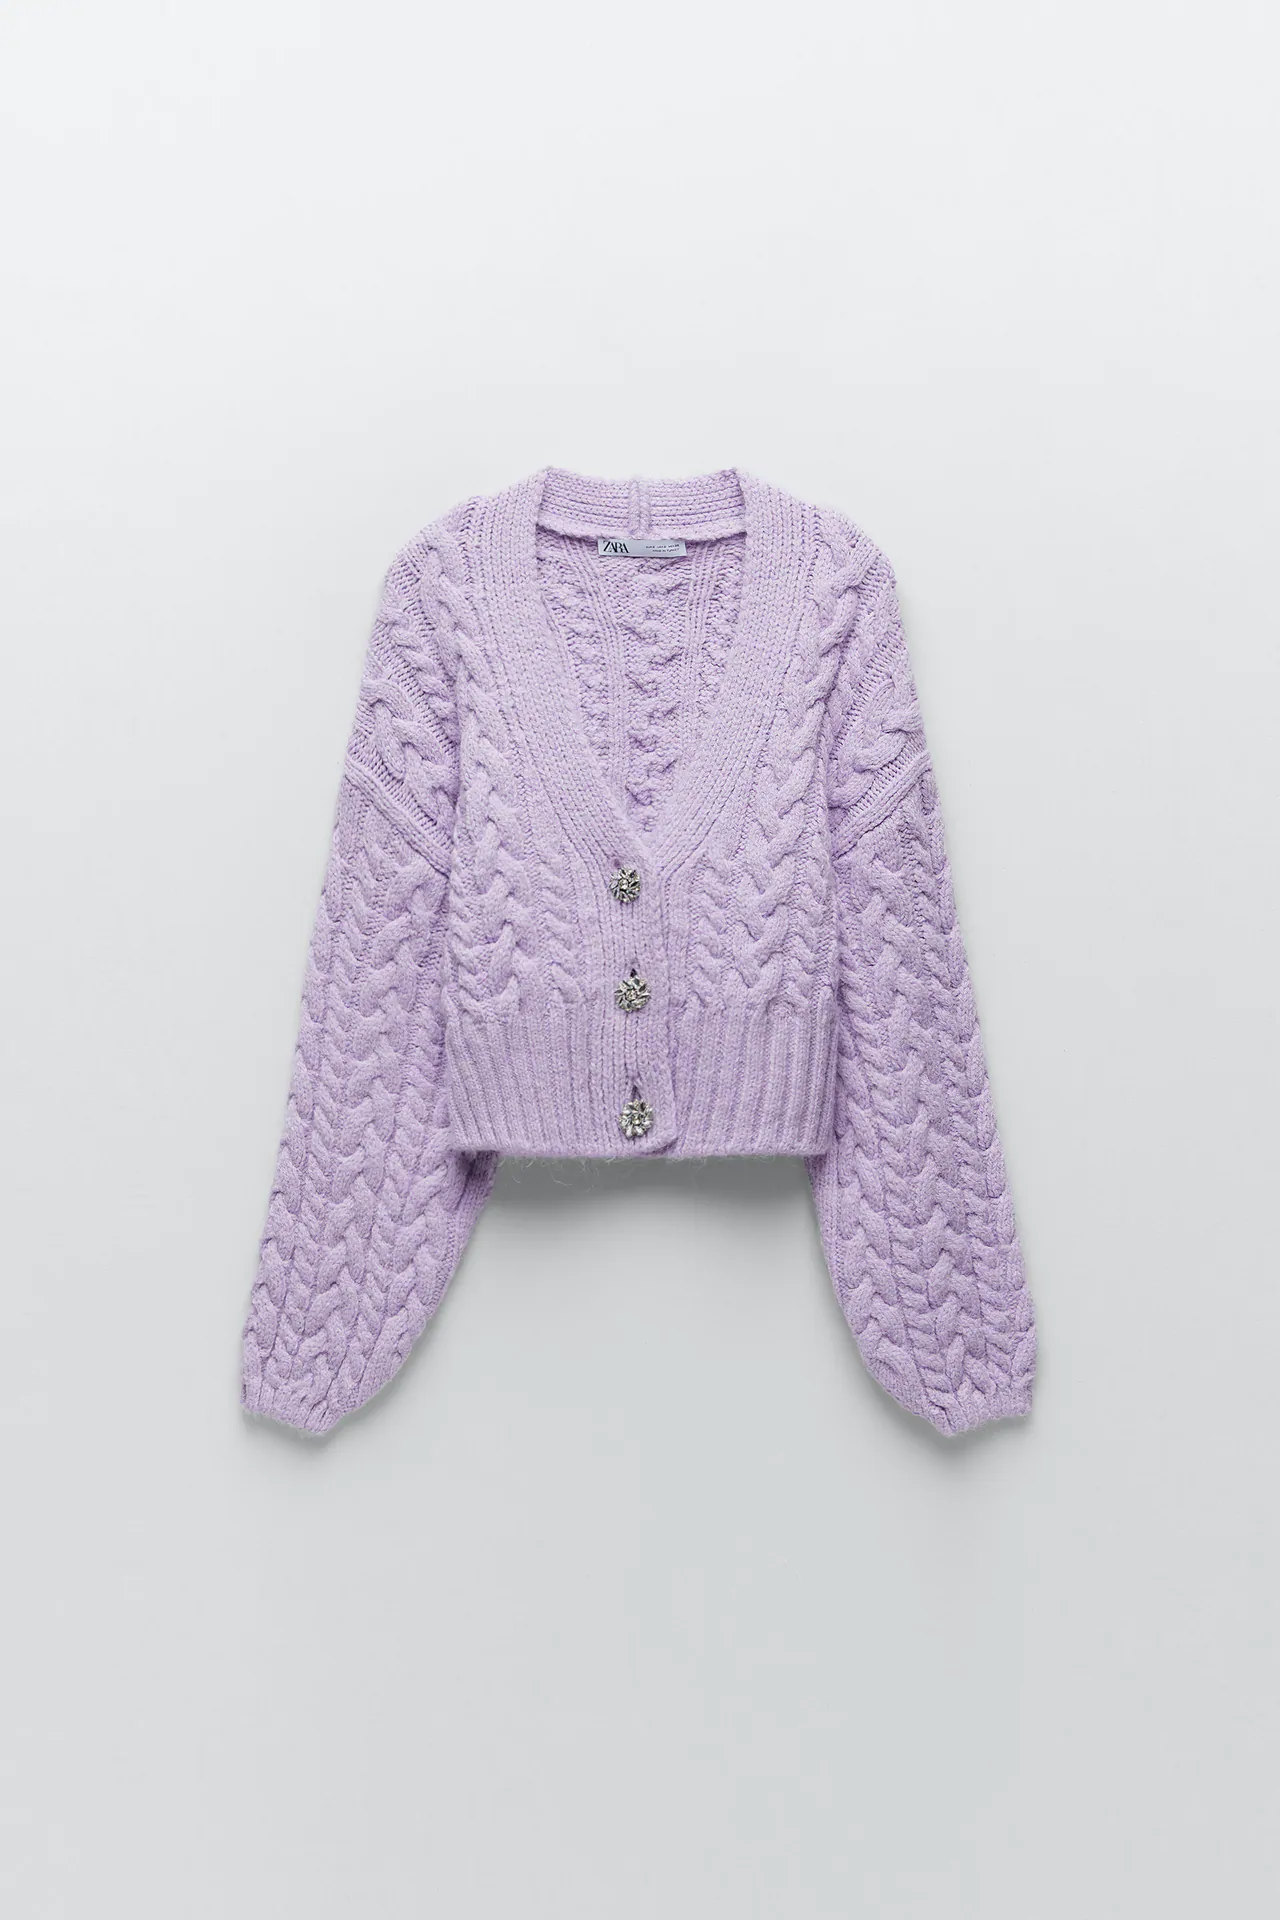 violet jewel button cable knit cardigan